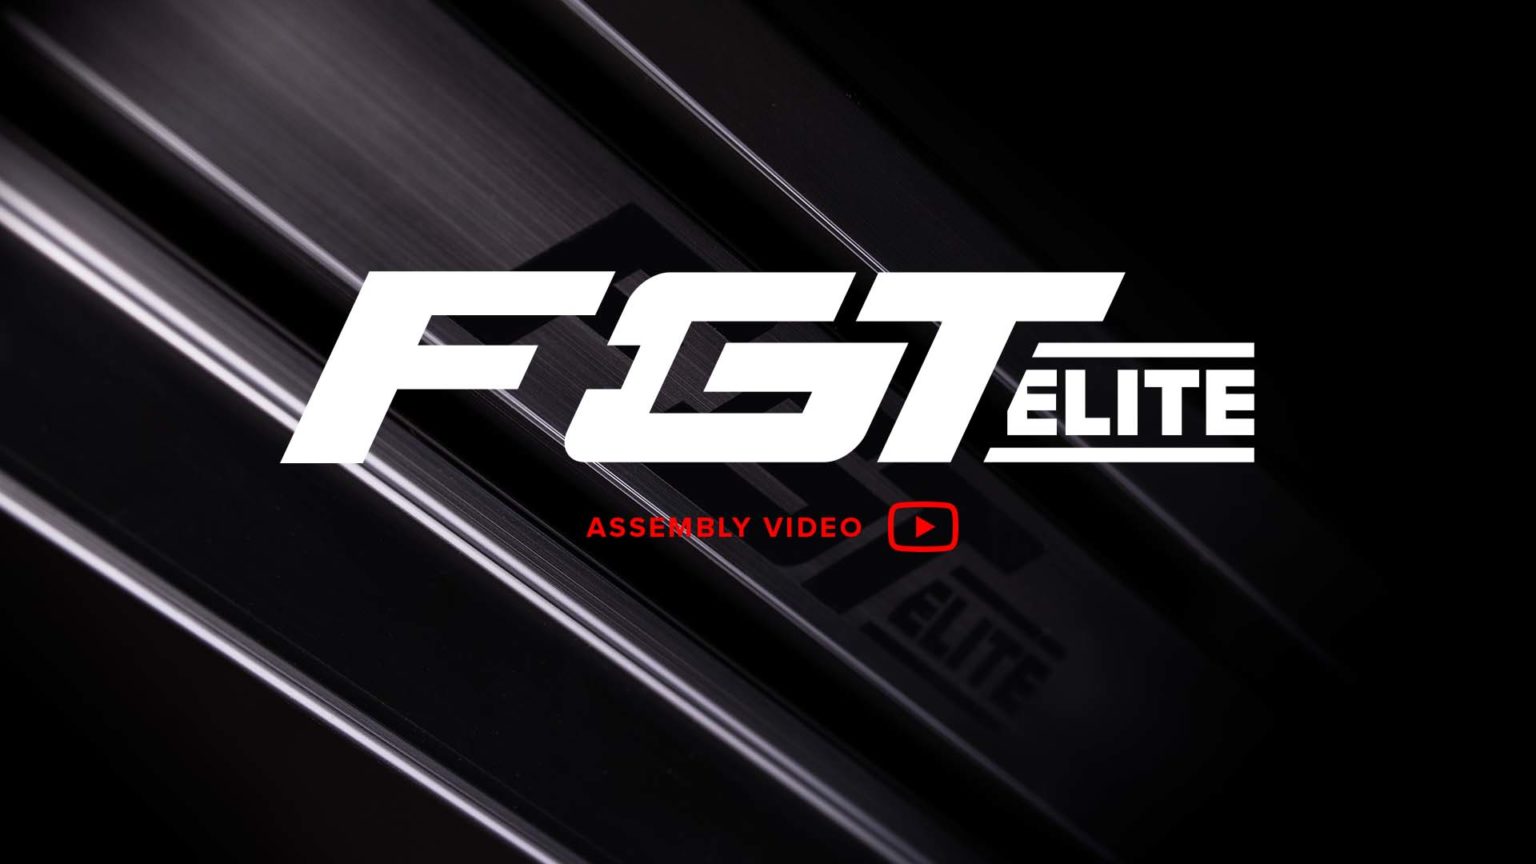 Fgt Lite Assembly Video